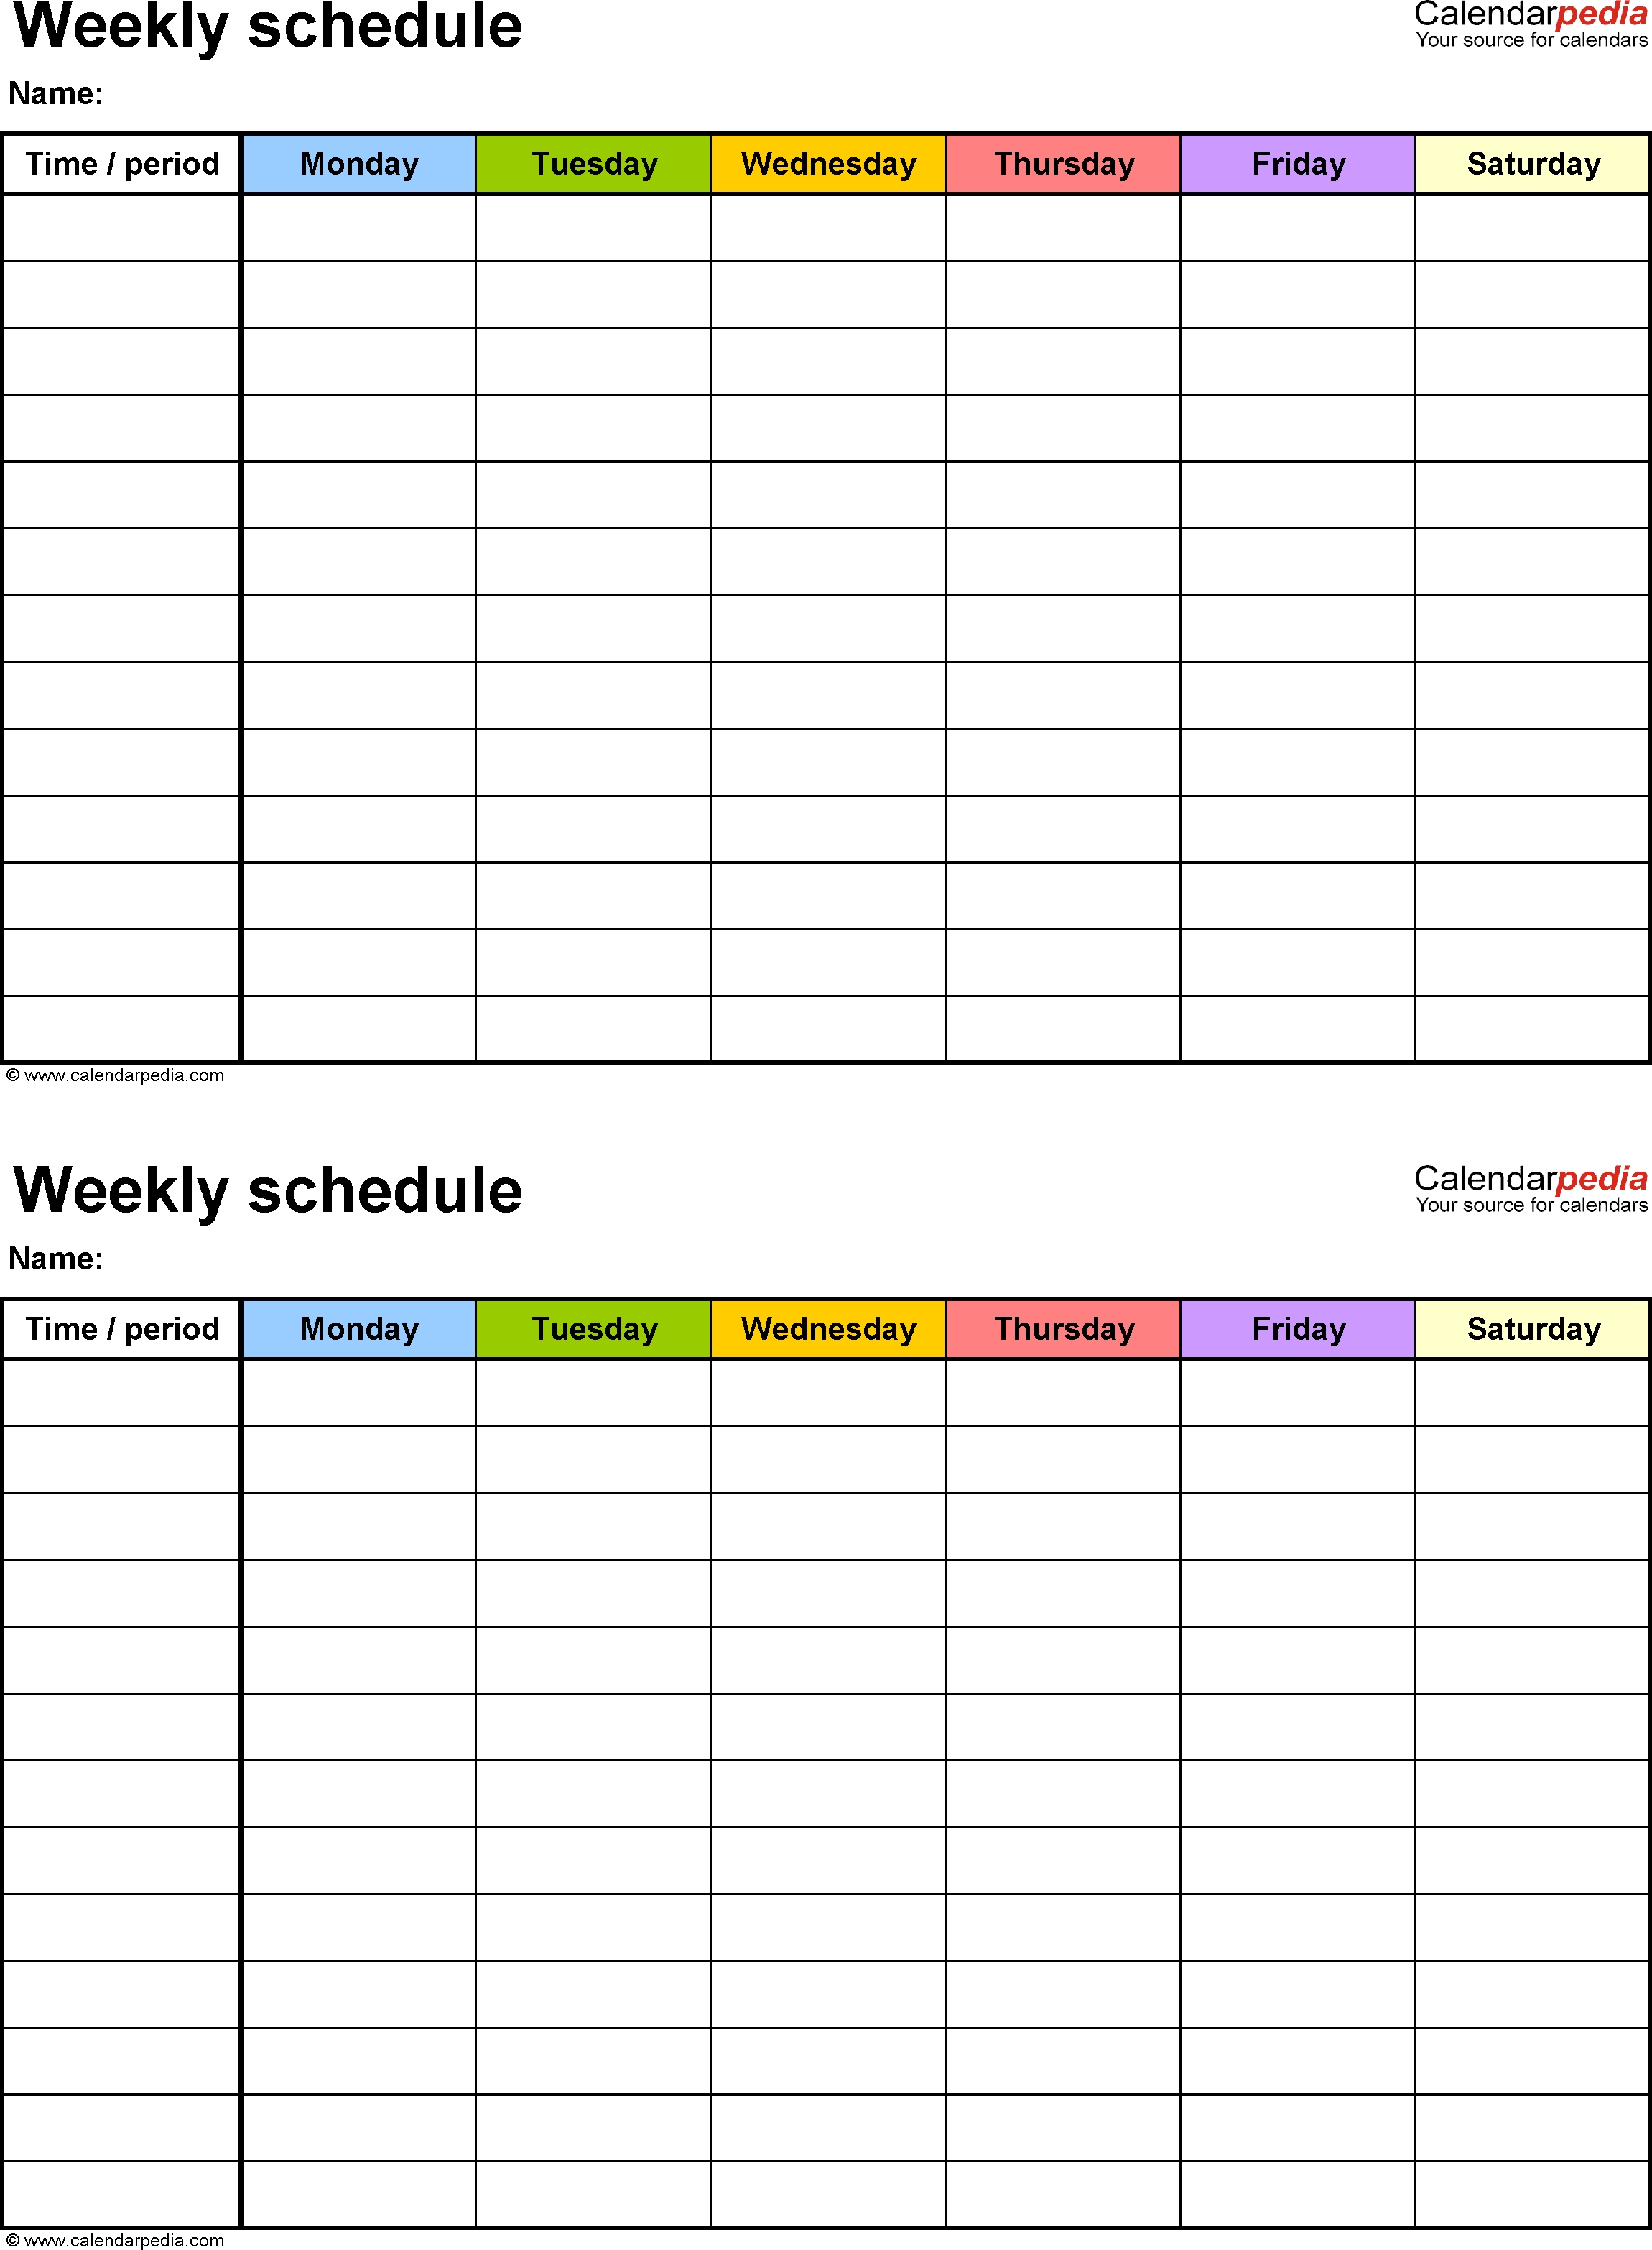 Free Weekly Schedule Templates For Word - 18 Templates within 6 Week Blank Schedule Template